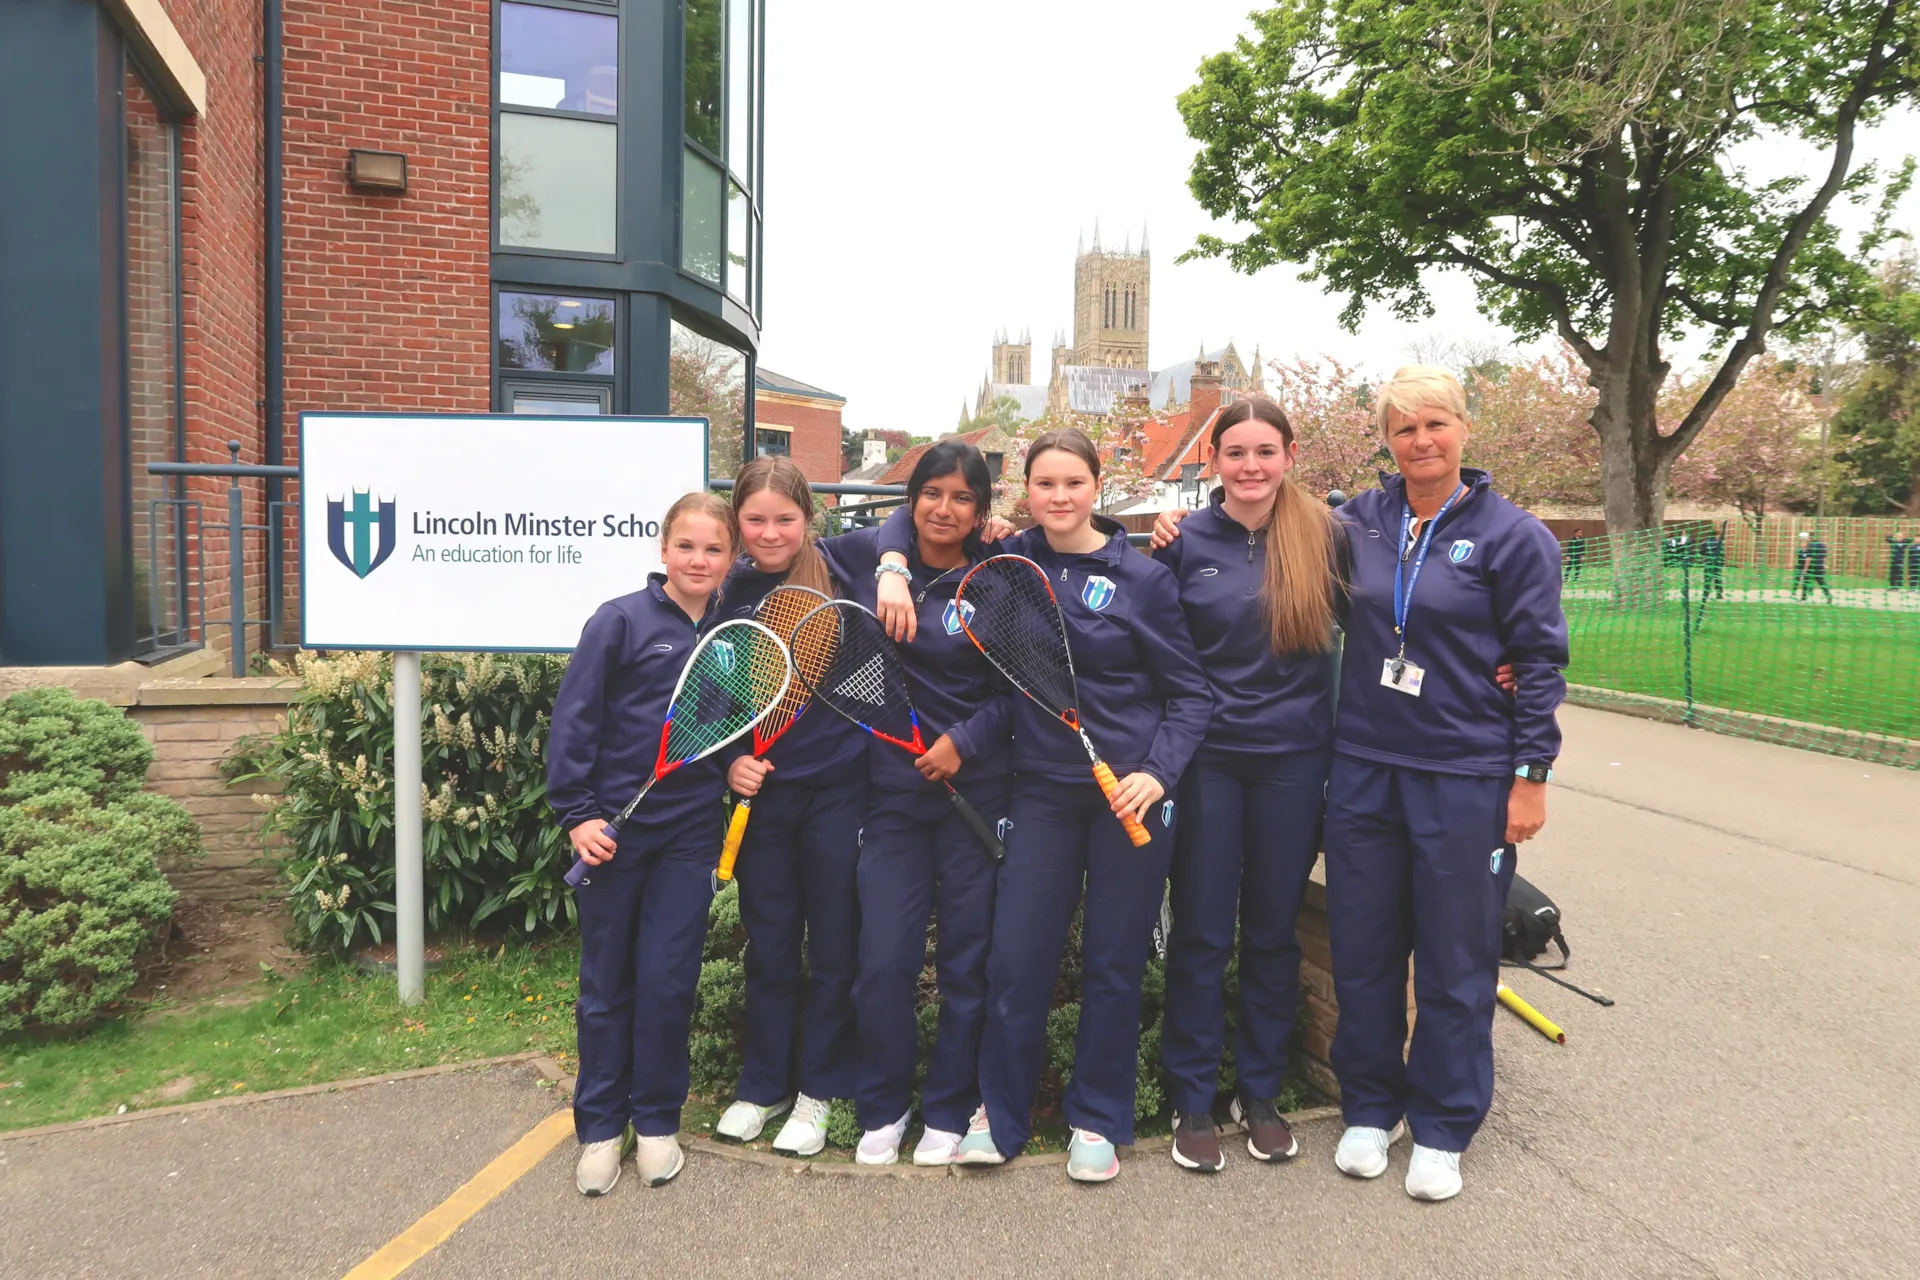 Pupils Crowned National Squash Champions